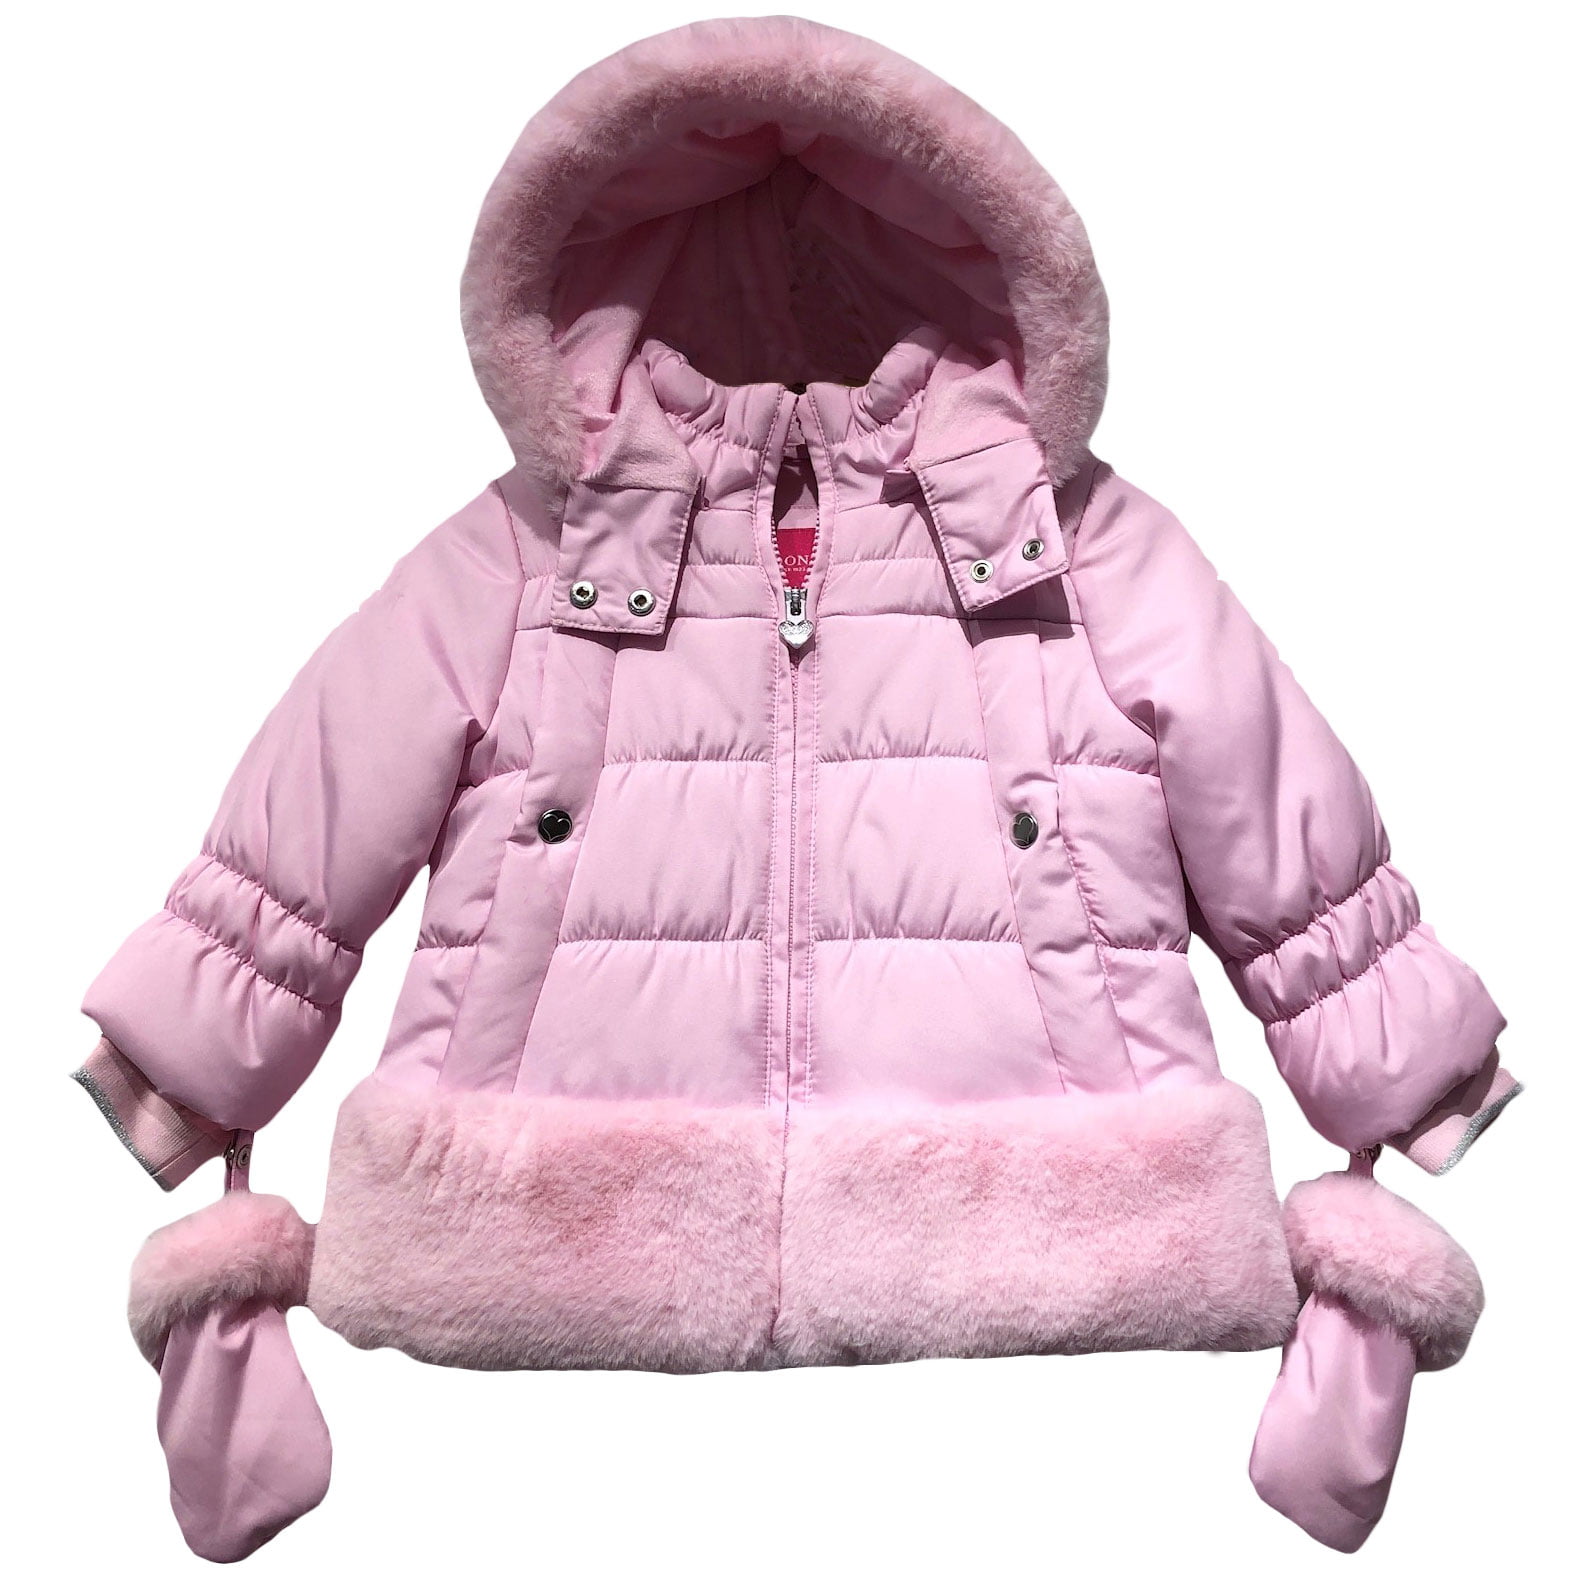 Kids Baby Girl Boy Winter Hooded Coat Floral Jacket Thick Warm Outerwear Pockets